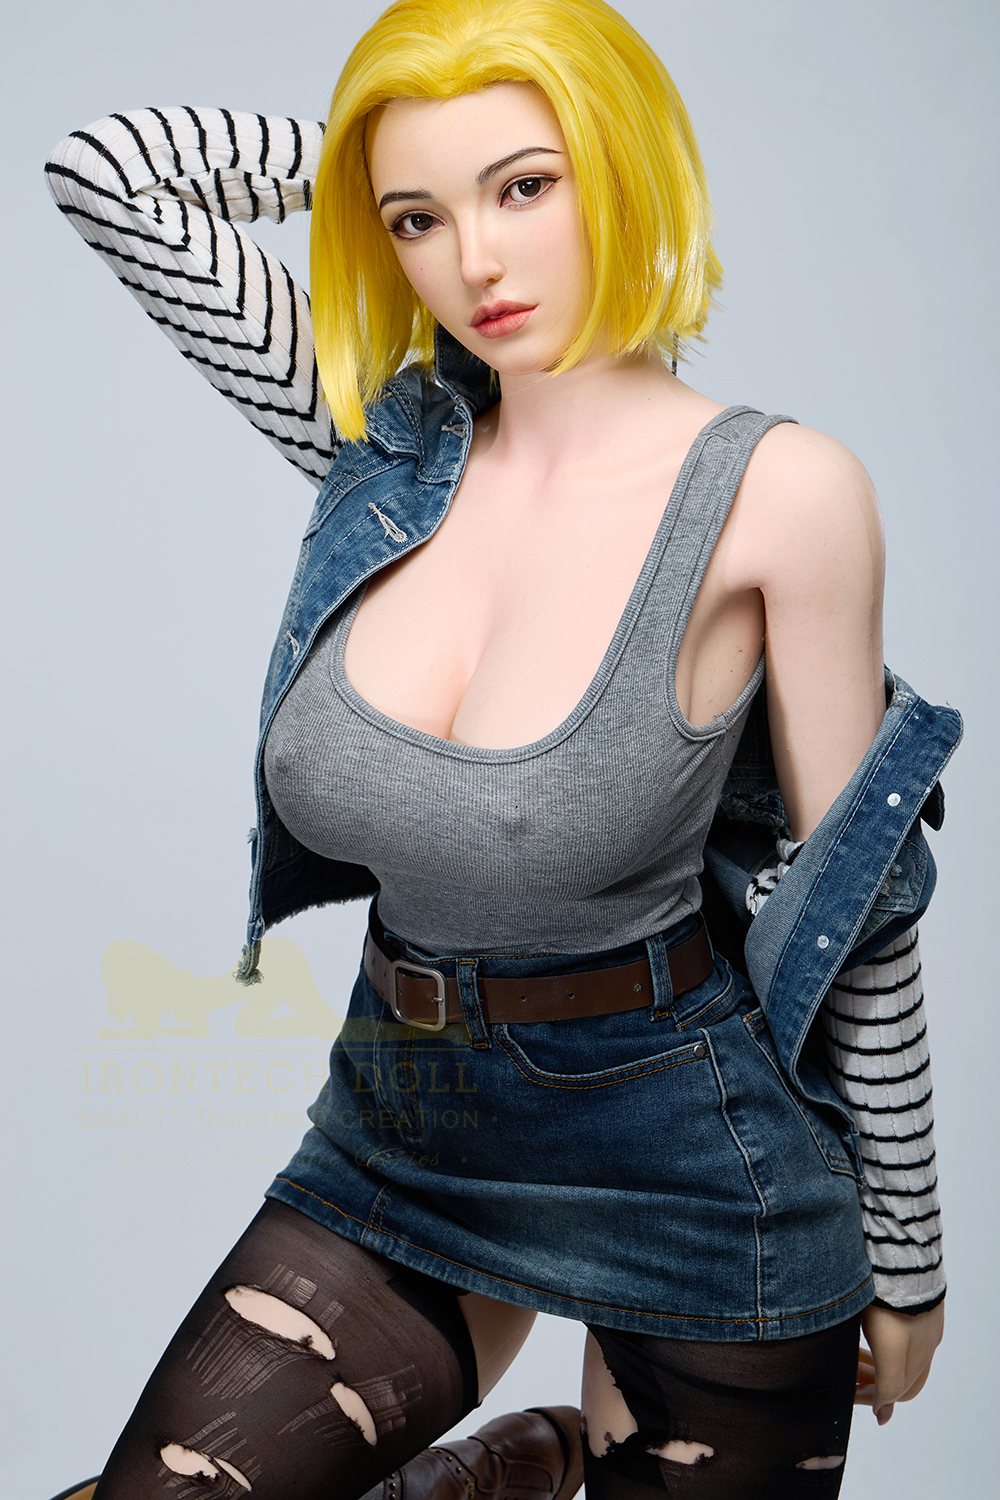 5ft2/159cm G Cup Android 18 Sex Doll S41 - Joline